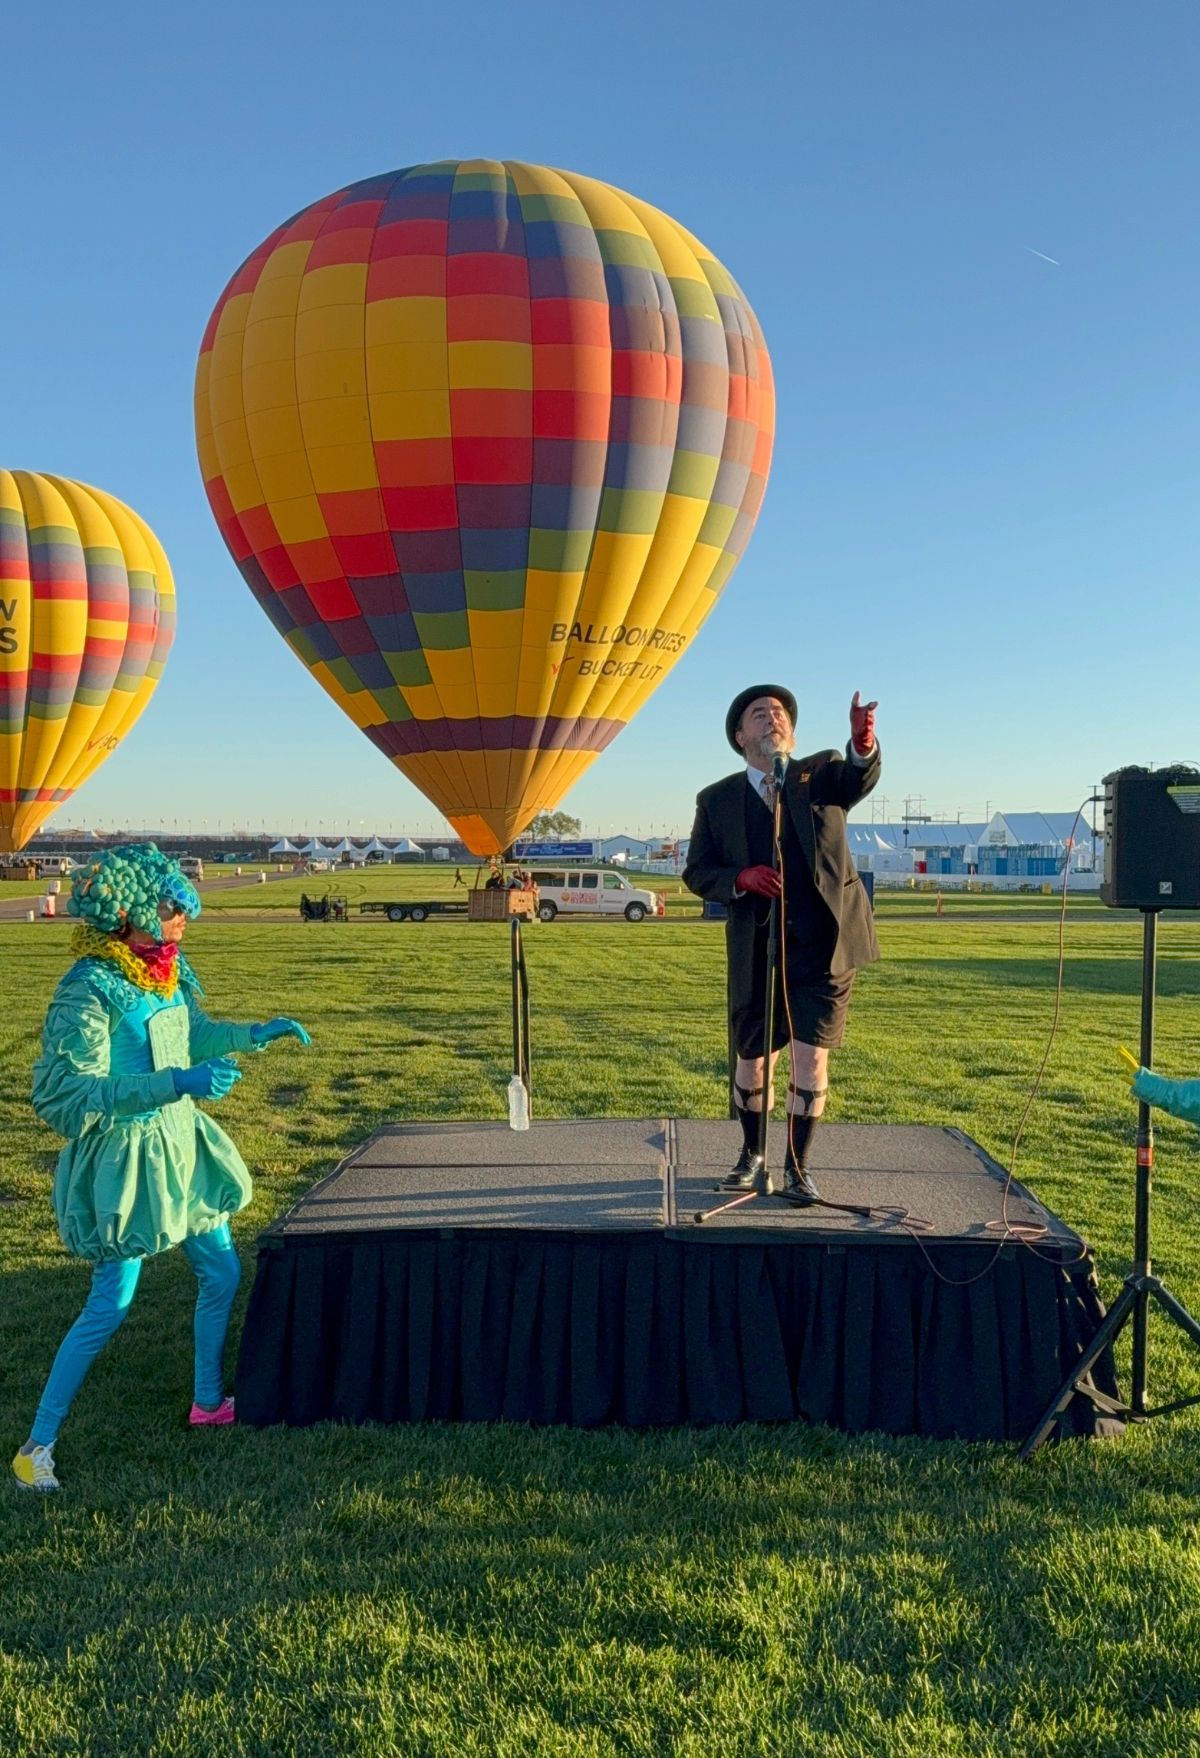 A group of people standing on a stage with hot air balloons in the background.